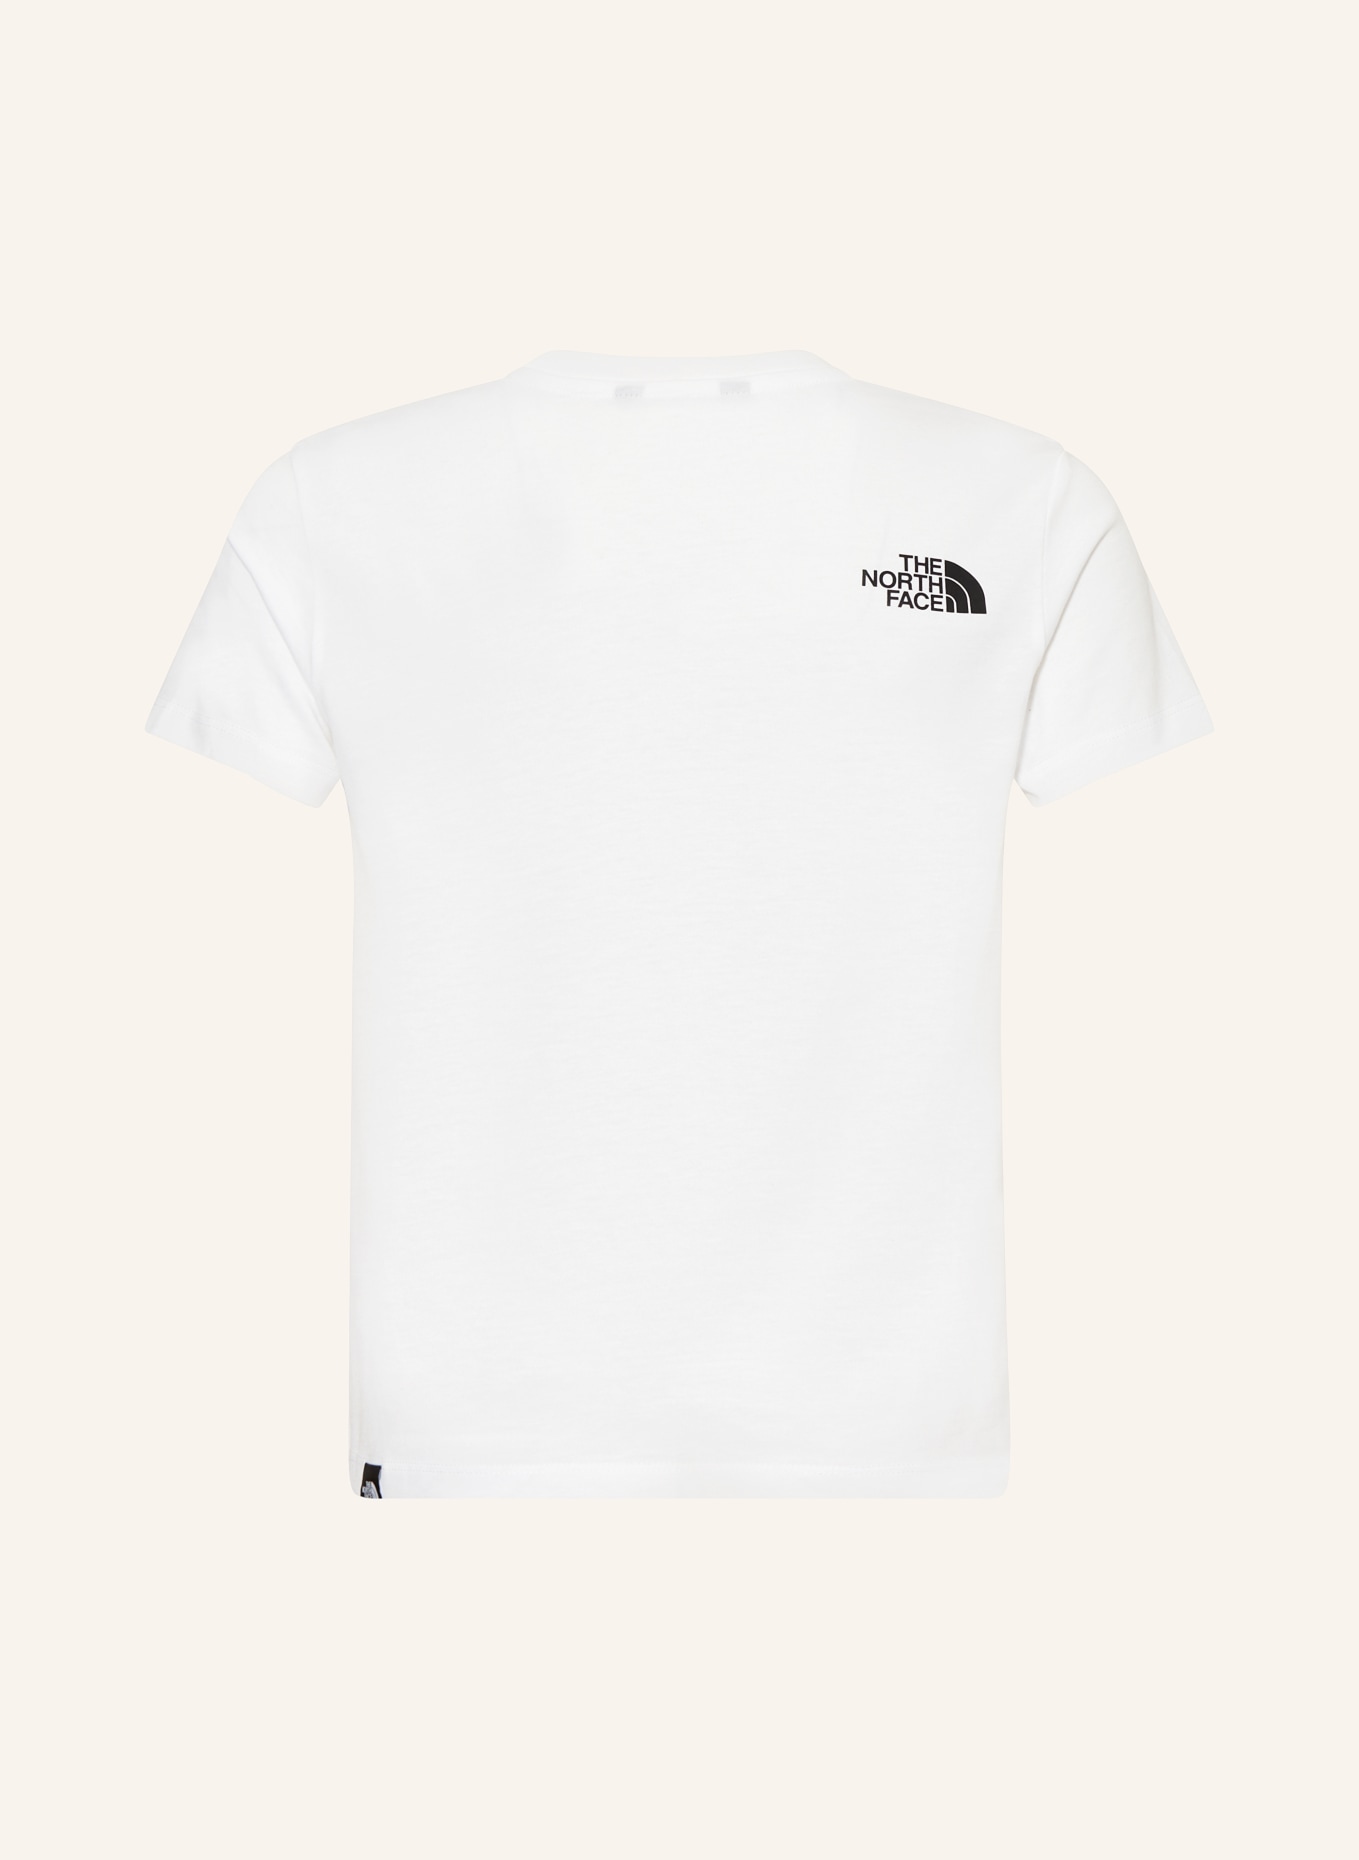 THE NORTH FACE T-Shirt, Farbe: WEISS (Bild 2)